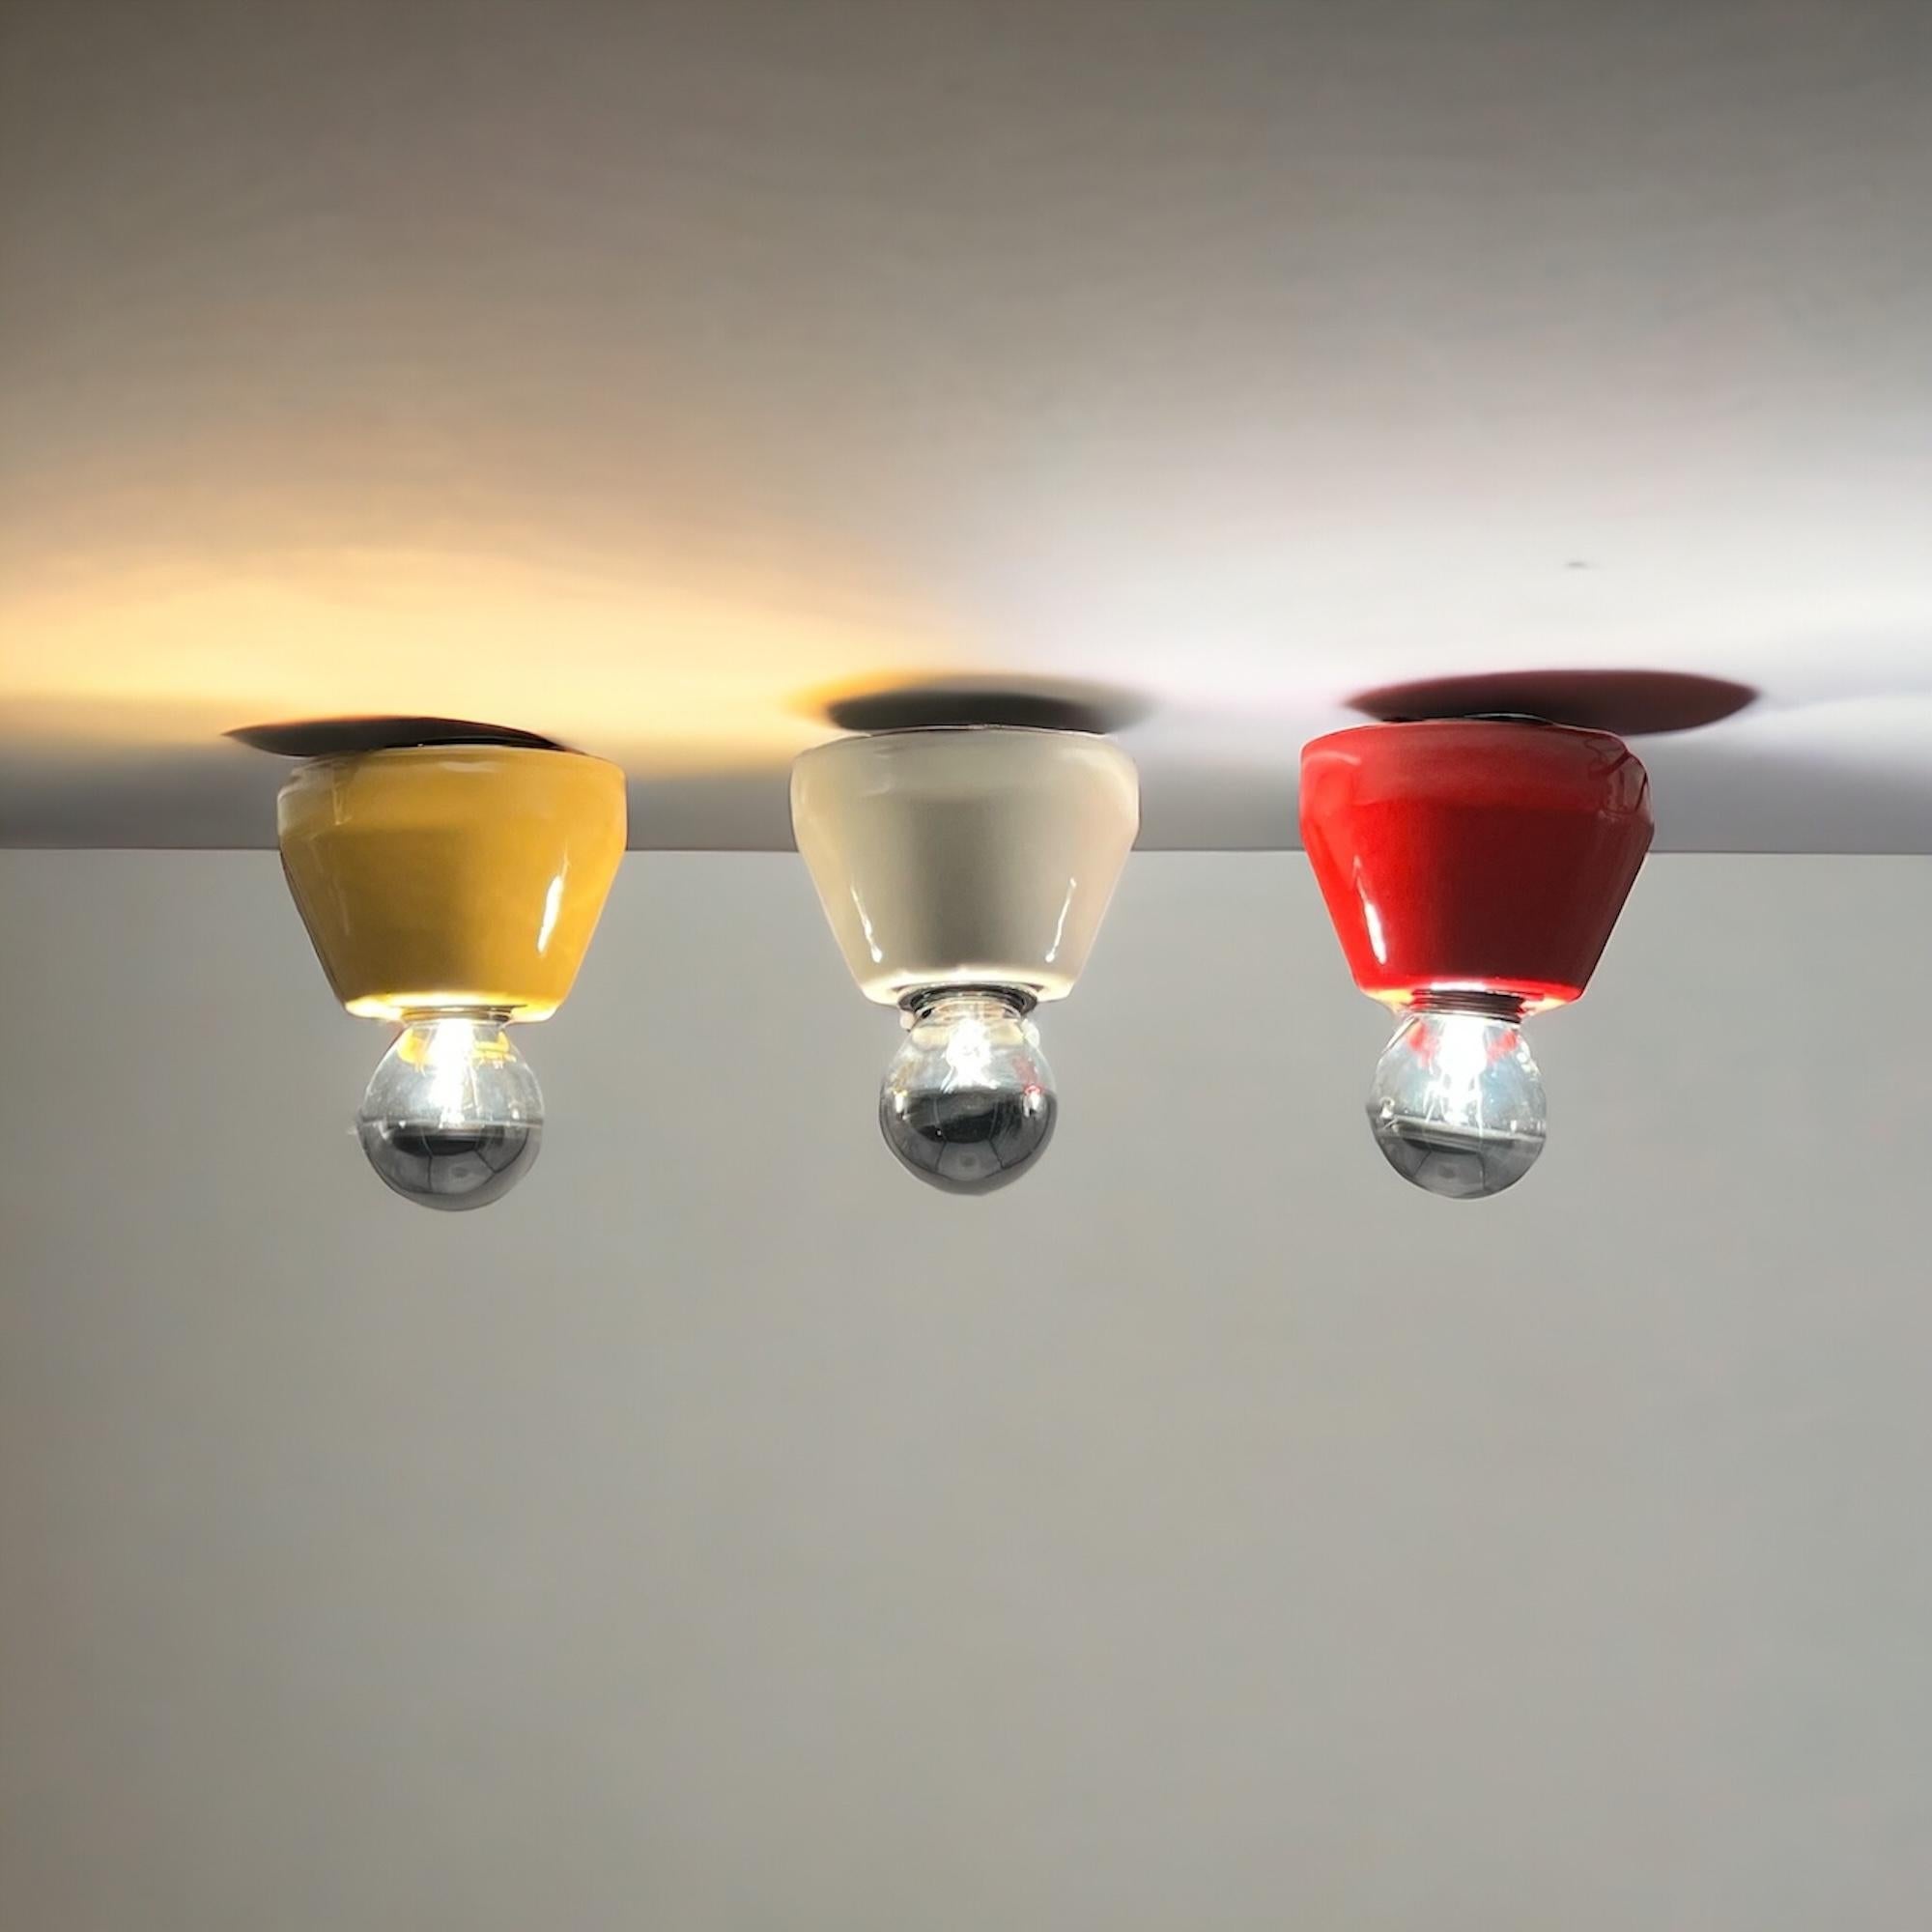 Metal Vintage 80s Ceramic Lights Imago Italy - Vibrant Hues - Set of 3 New Old Stock For Sale